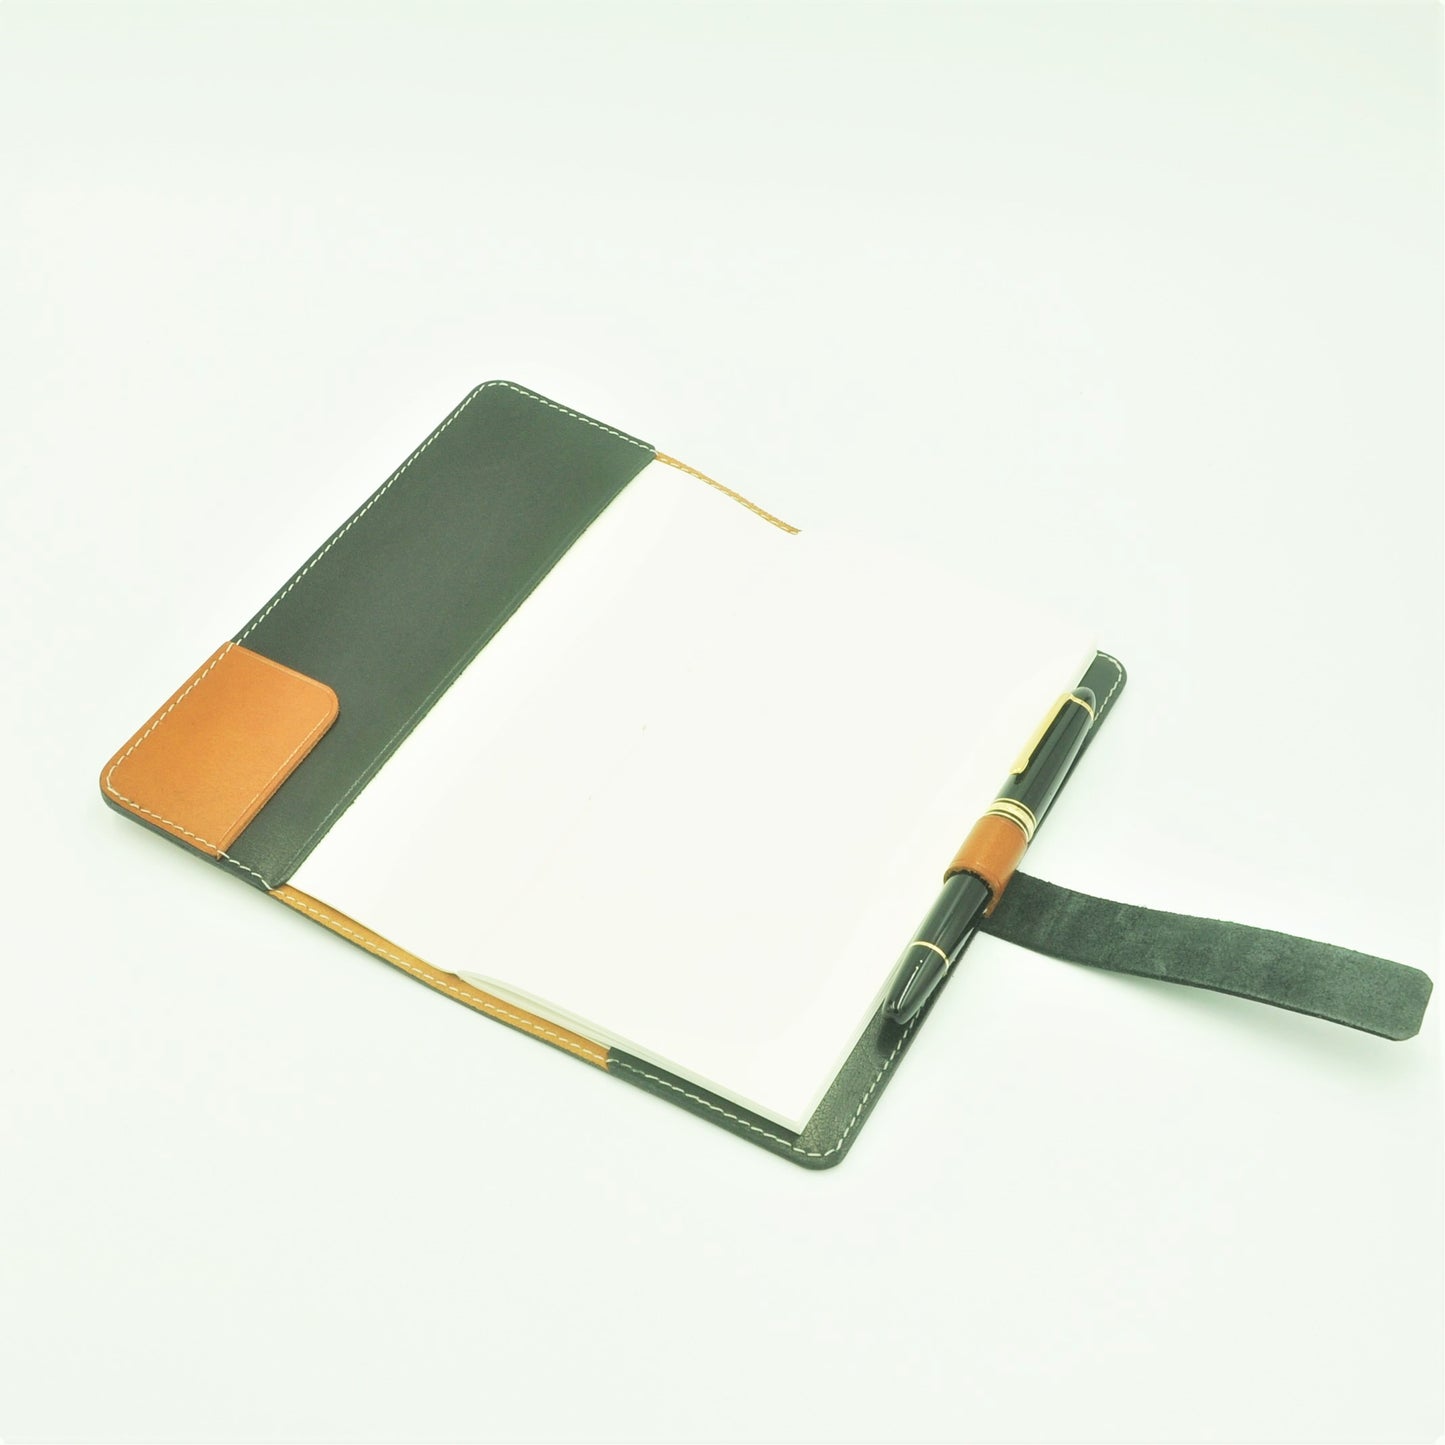 HERITAGE DL Journal & Notebook Sleeve Duo-Tone Special Edition